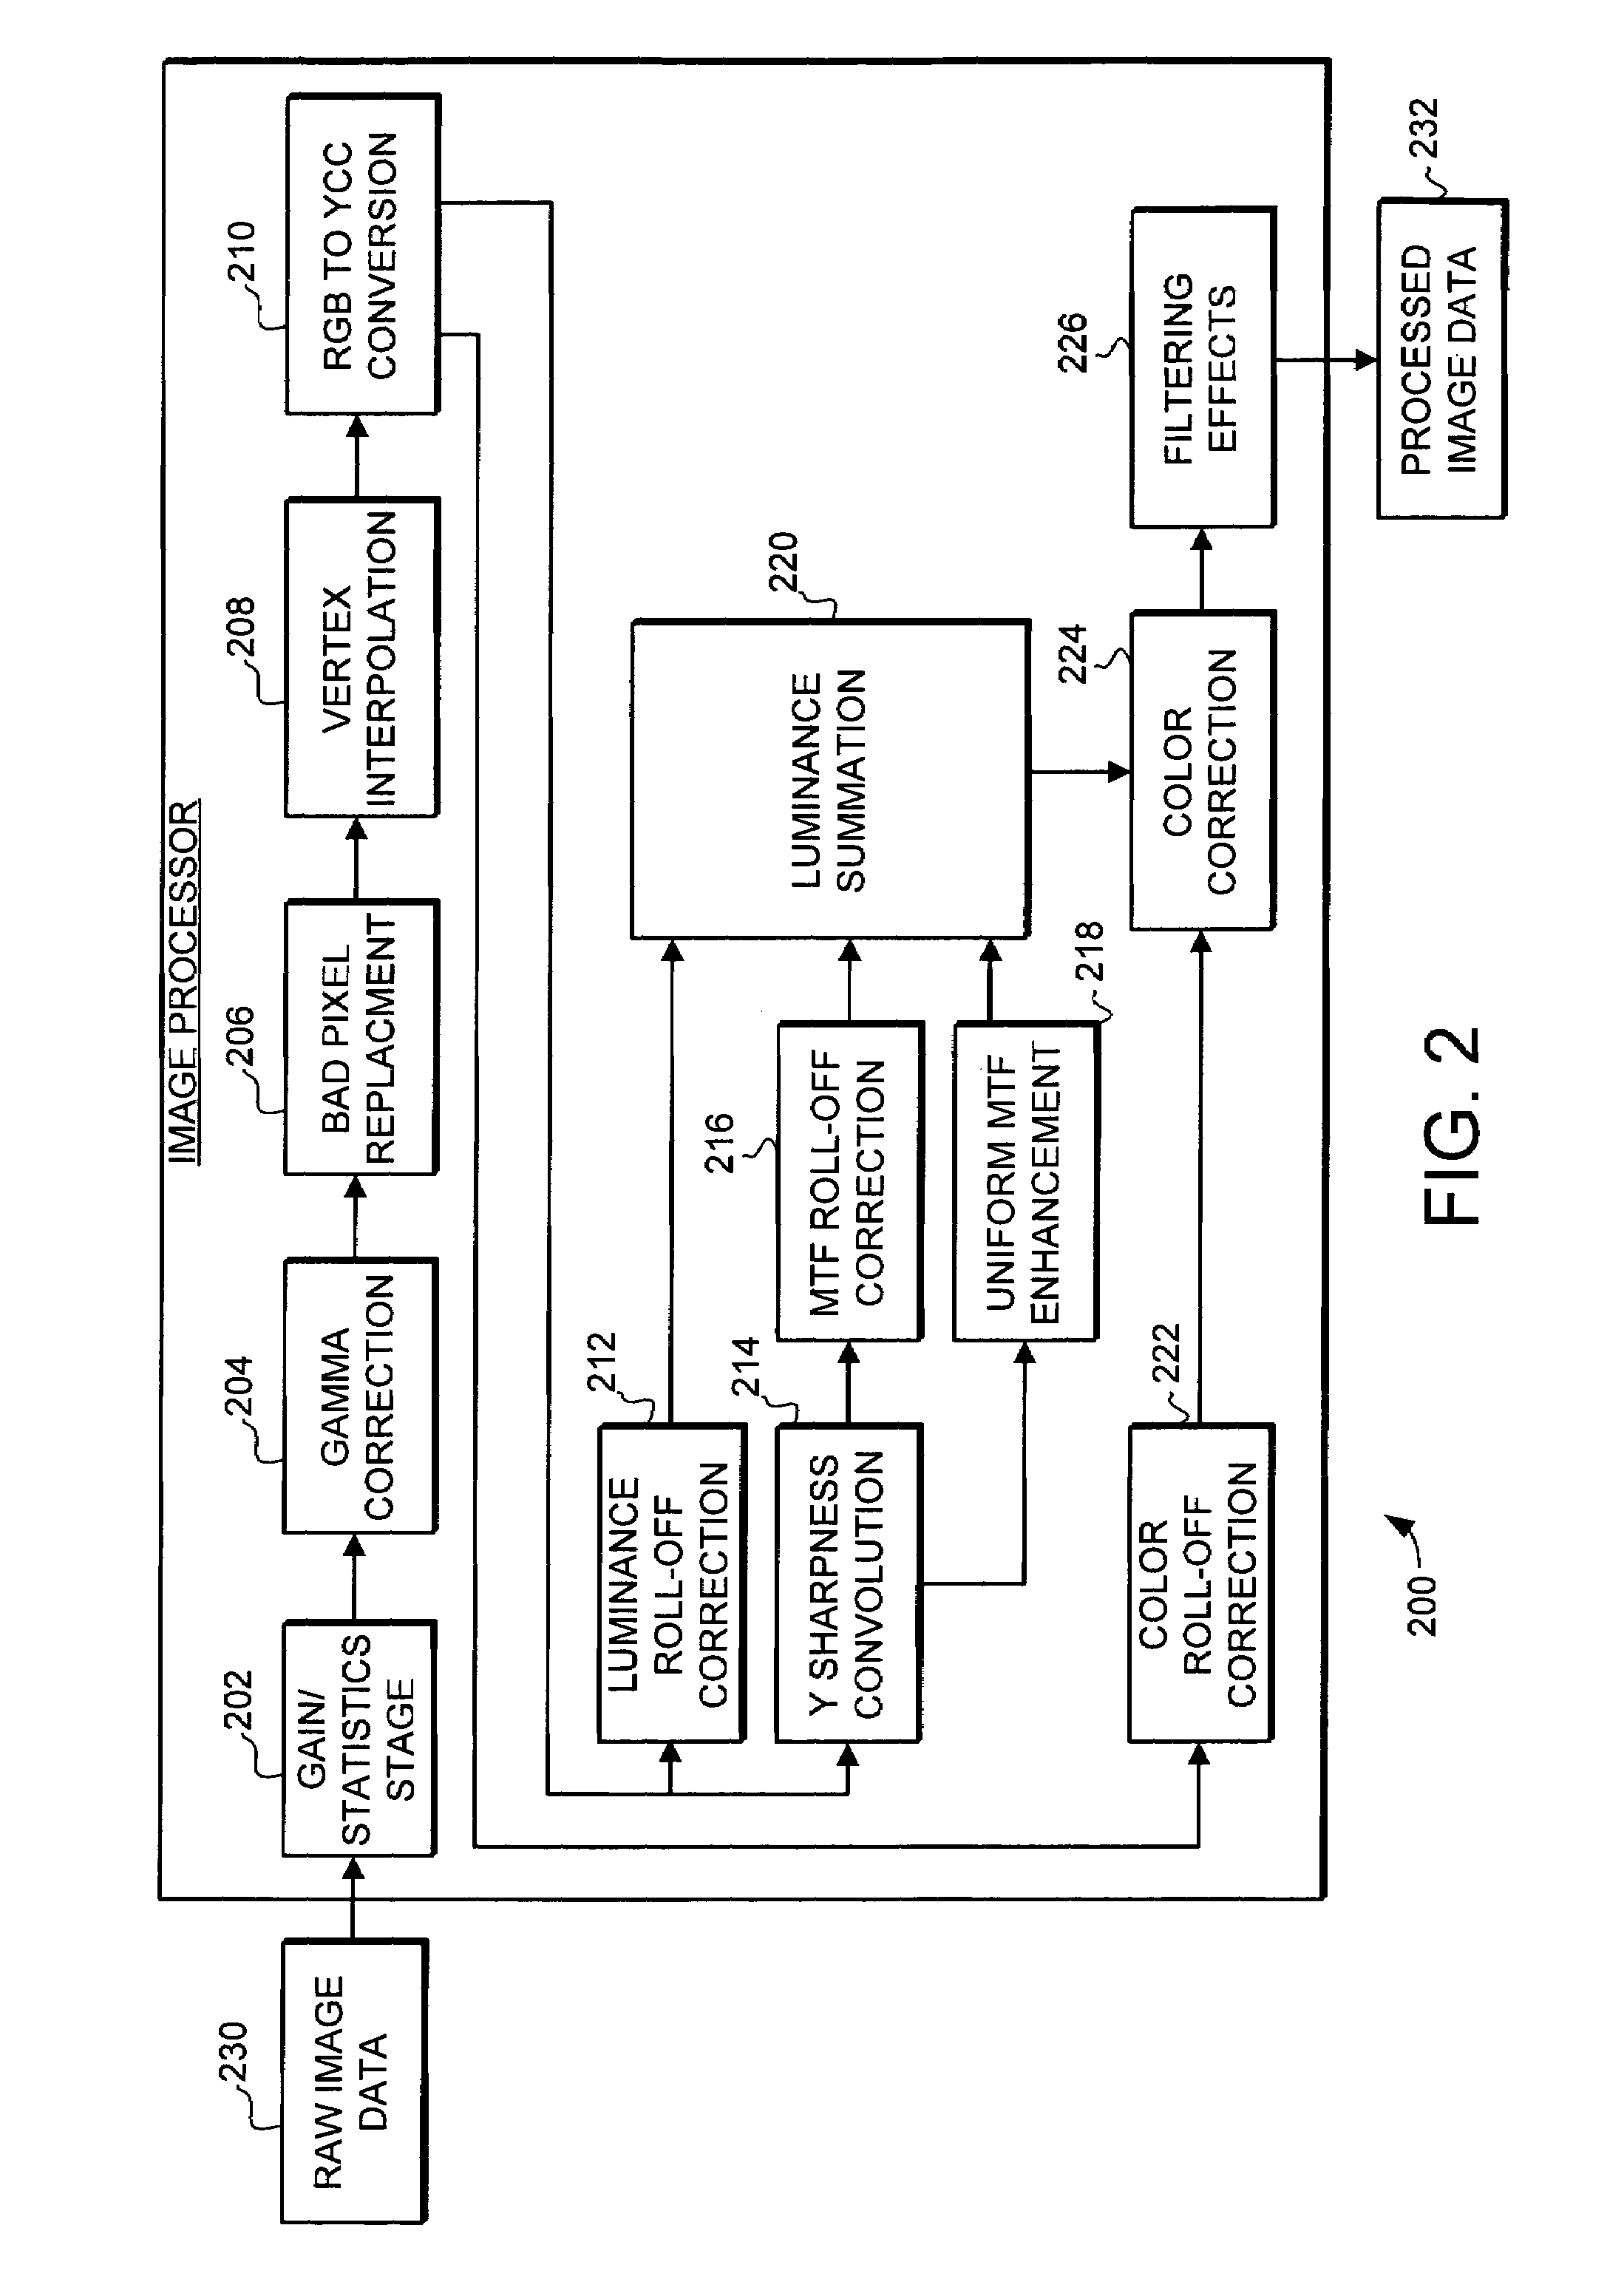 System and method for bad pixel replacement in image processing